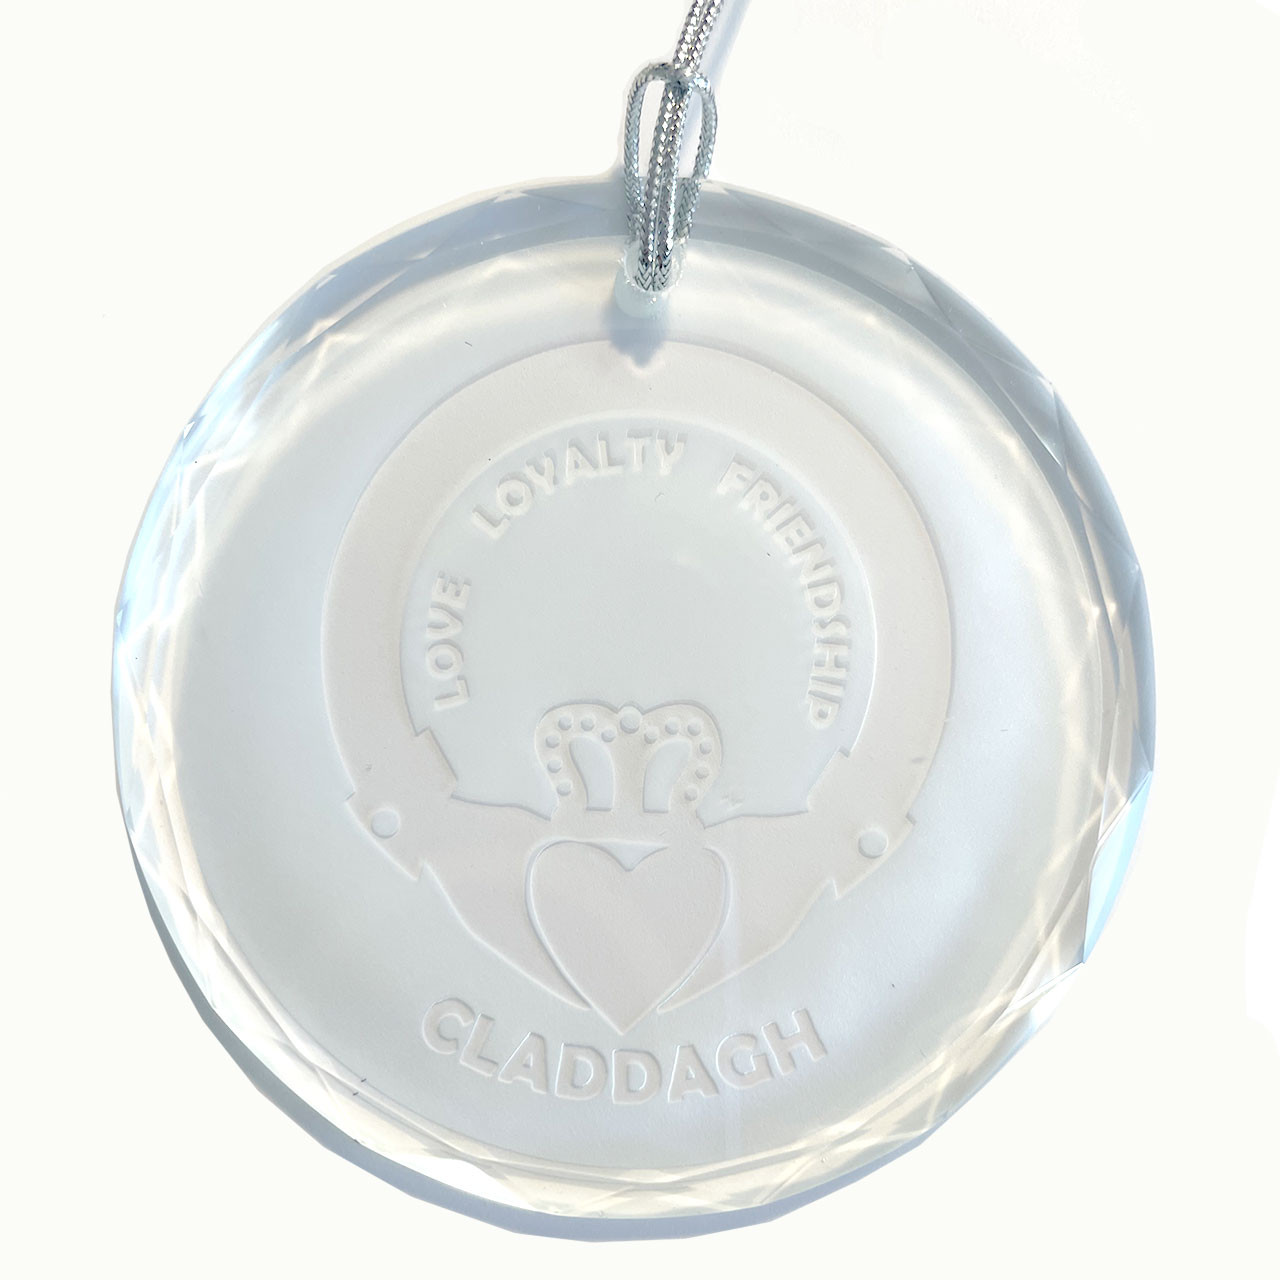 Crystal Claddagh Ornament imported from Ireland